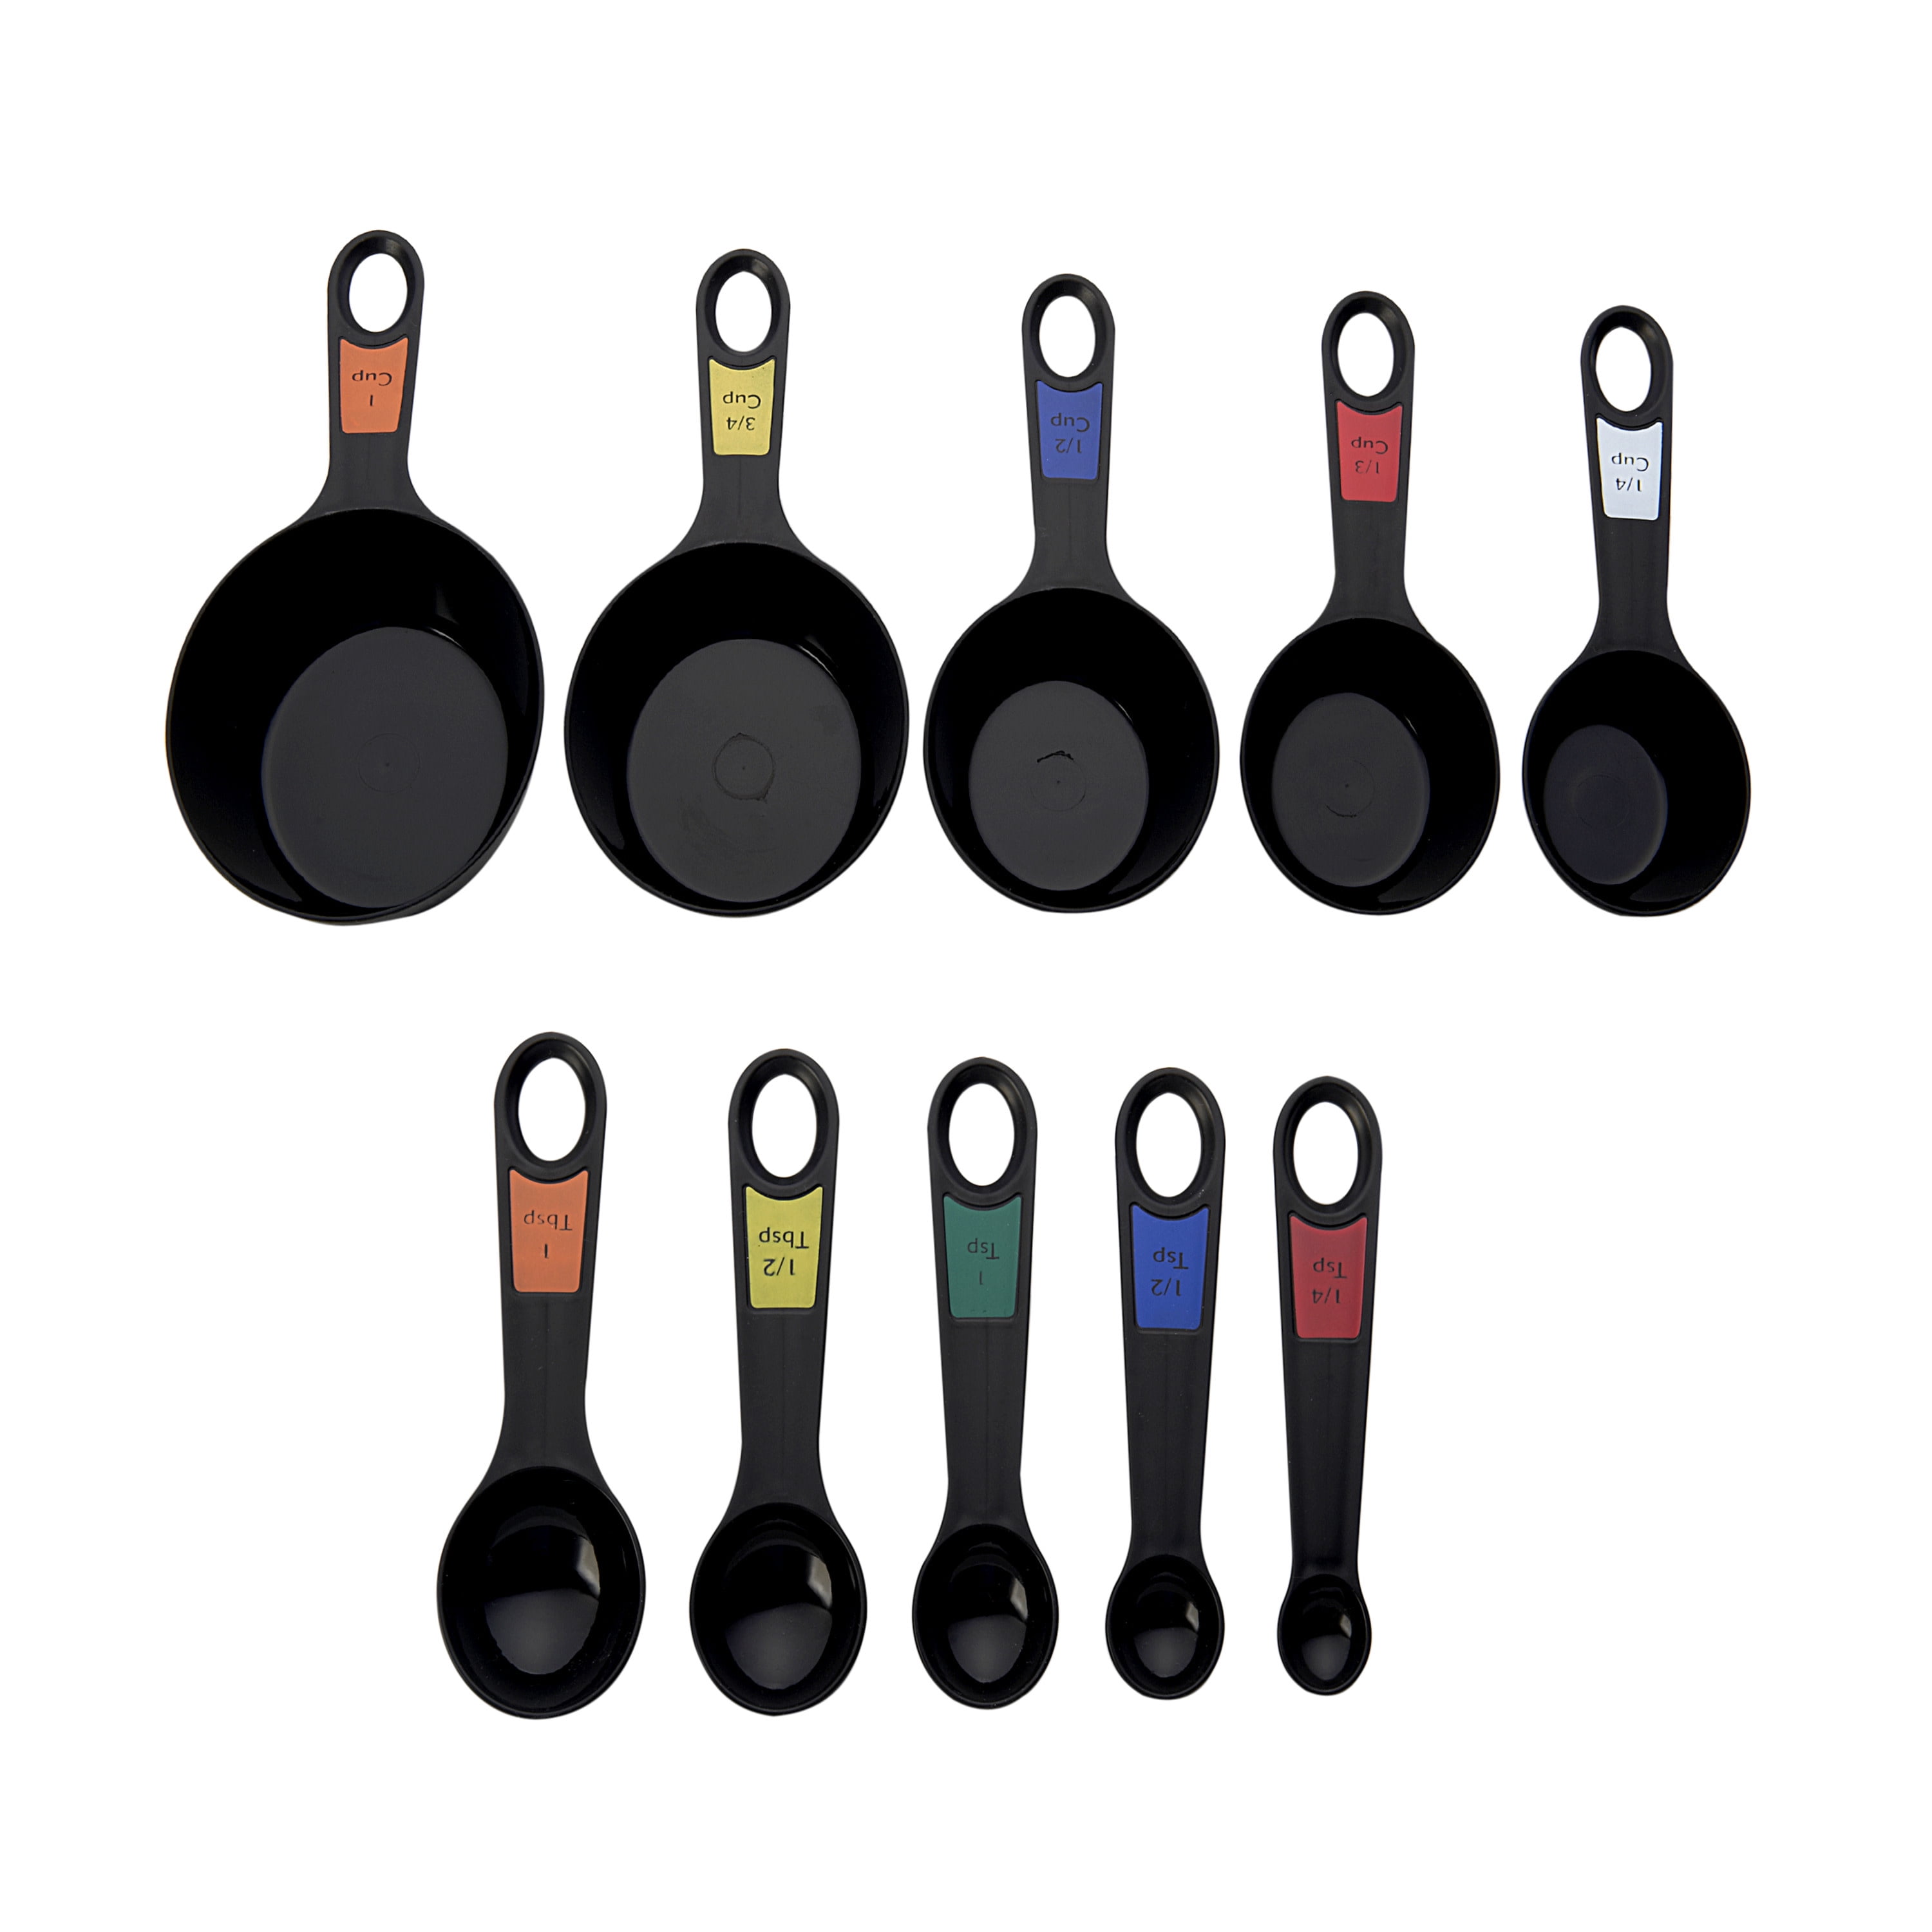 Farberware Professional 10-piece Plastic Measuring-cup and Spoon Set in Black